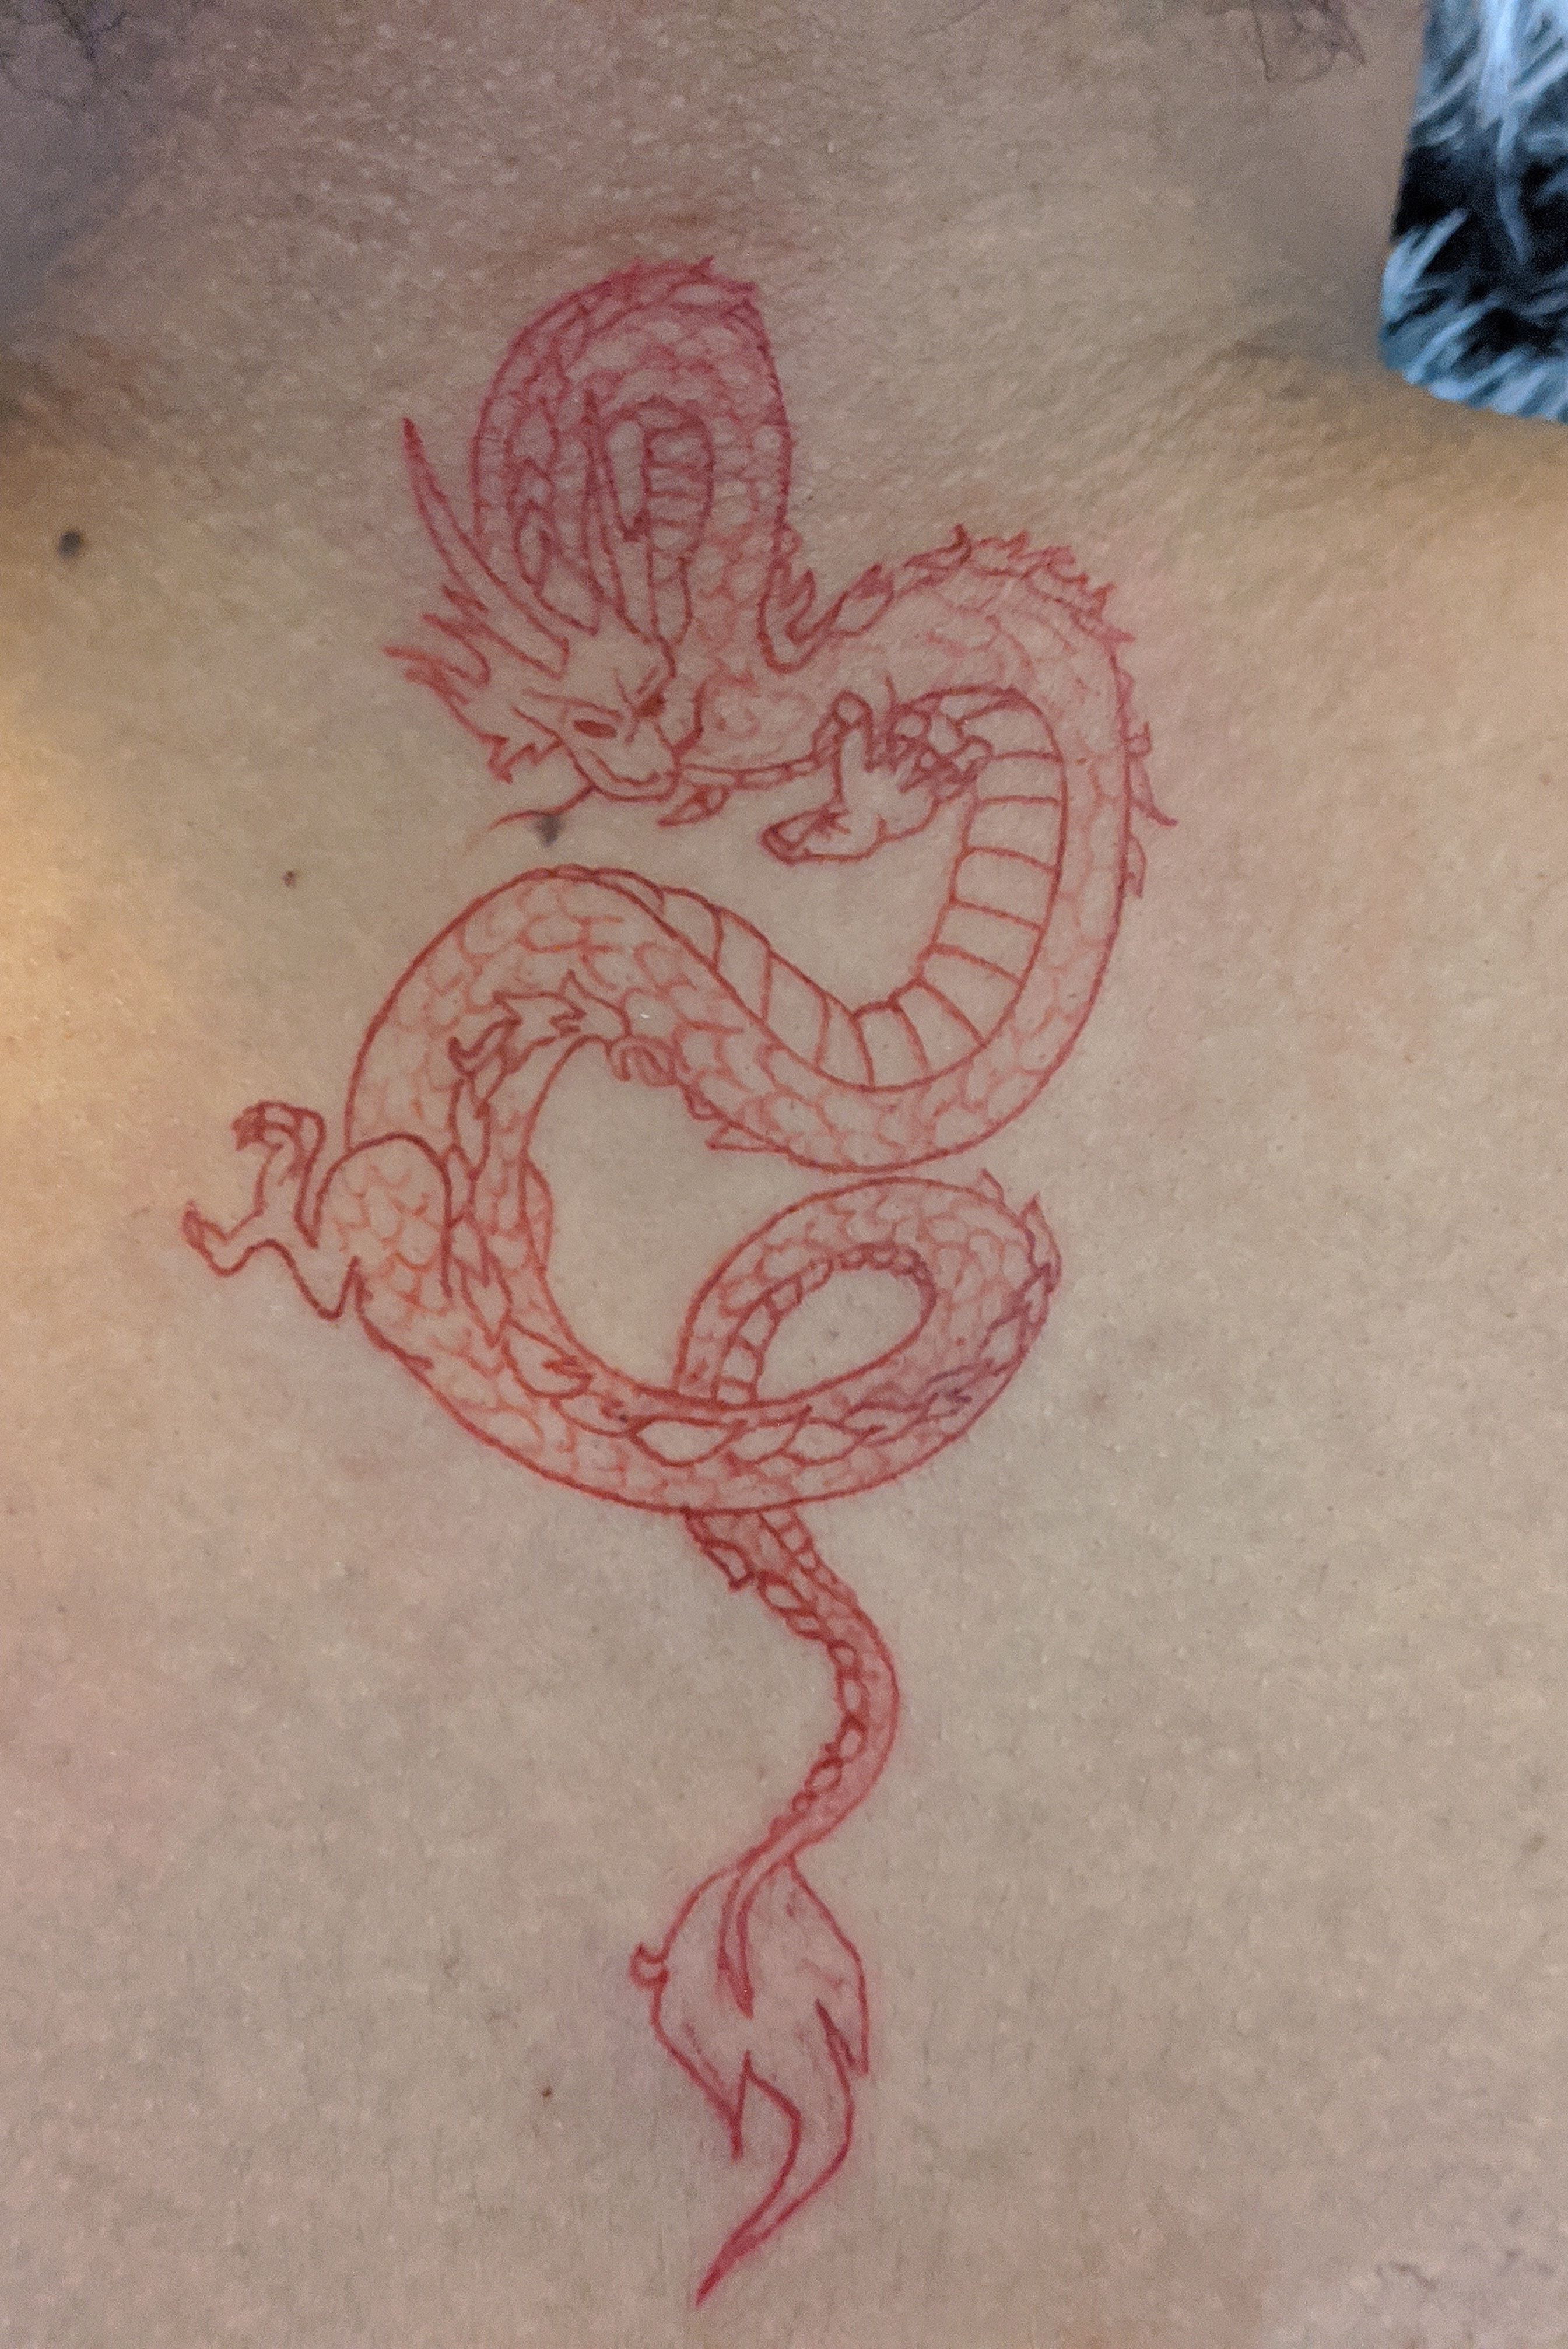 Positive Vibrations Tattoos Malta  Red dragon tattoo for a girl on fire  Thank you Kylie Kelly and welldone for sitting solid was a pleasurenow  booking SeptemberOctoberpm for a consultation  Facebook